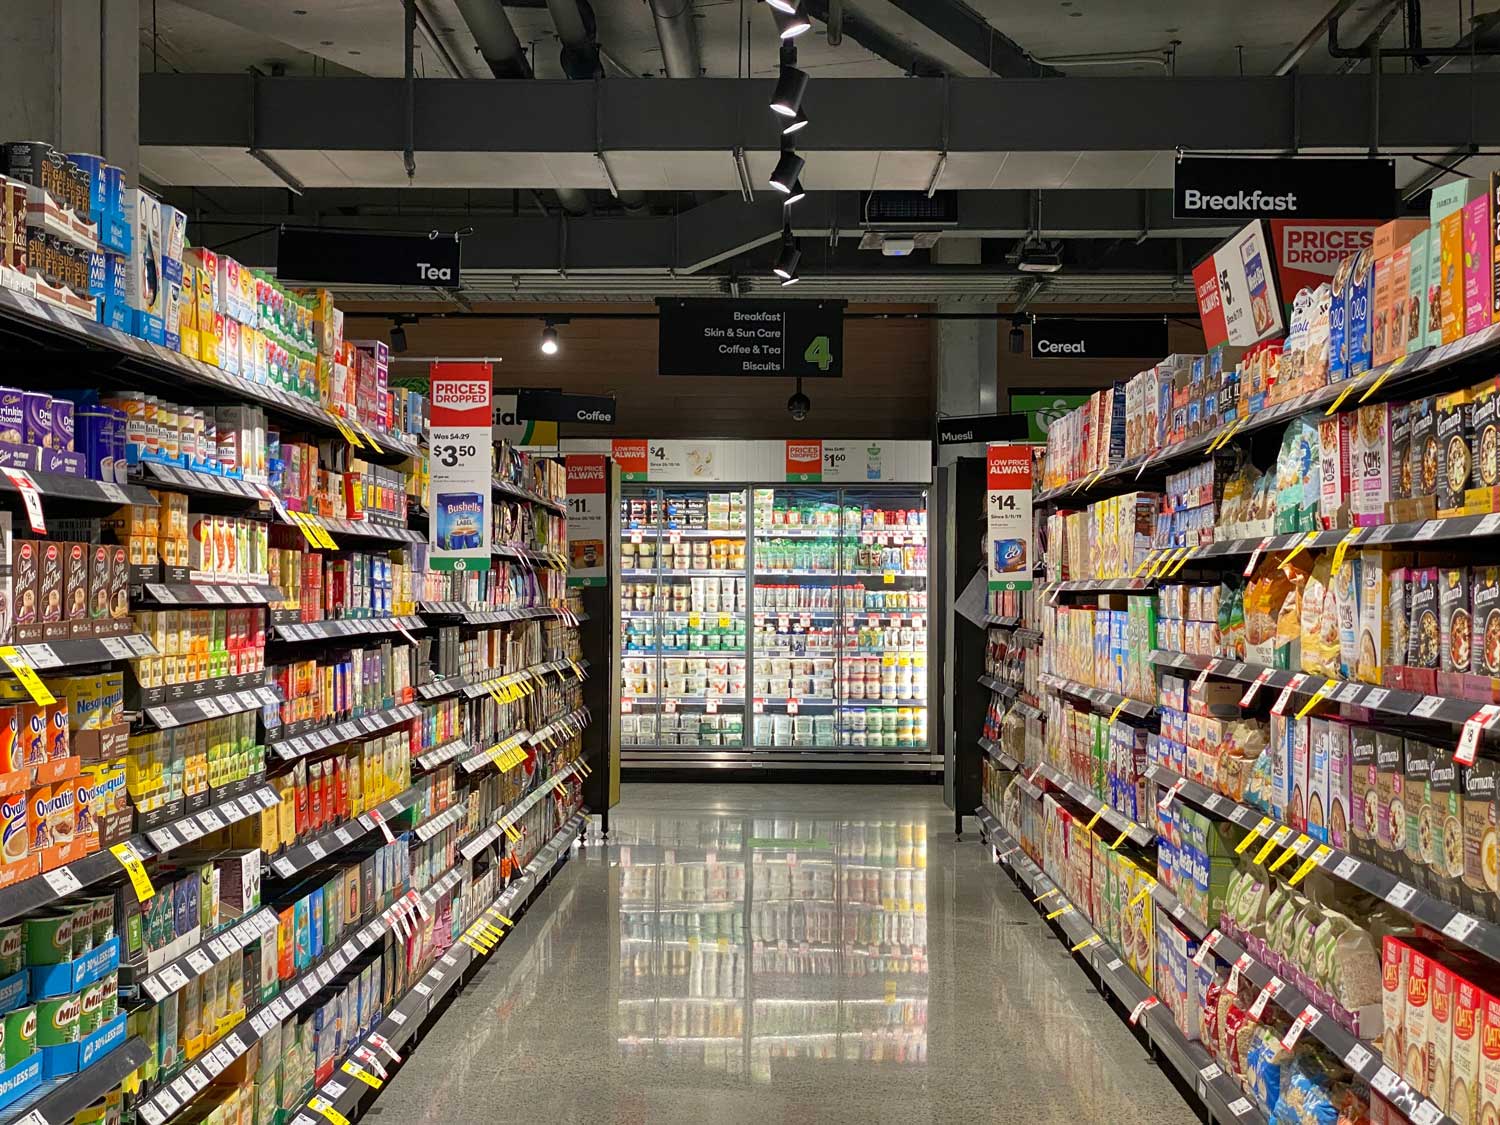 Products in a super market isle